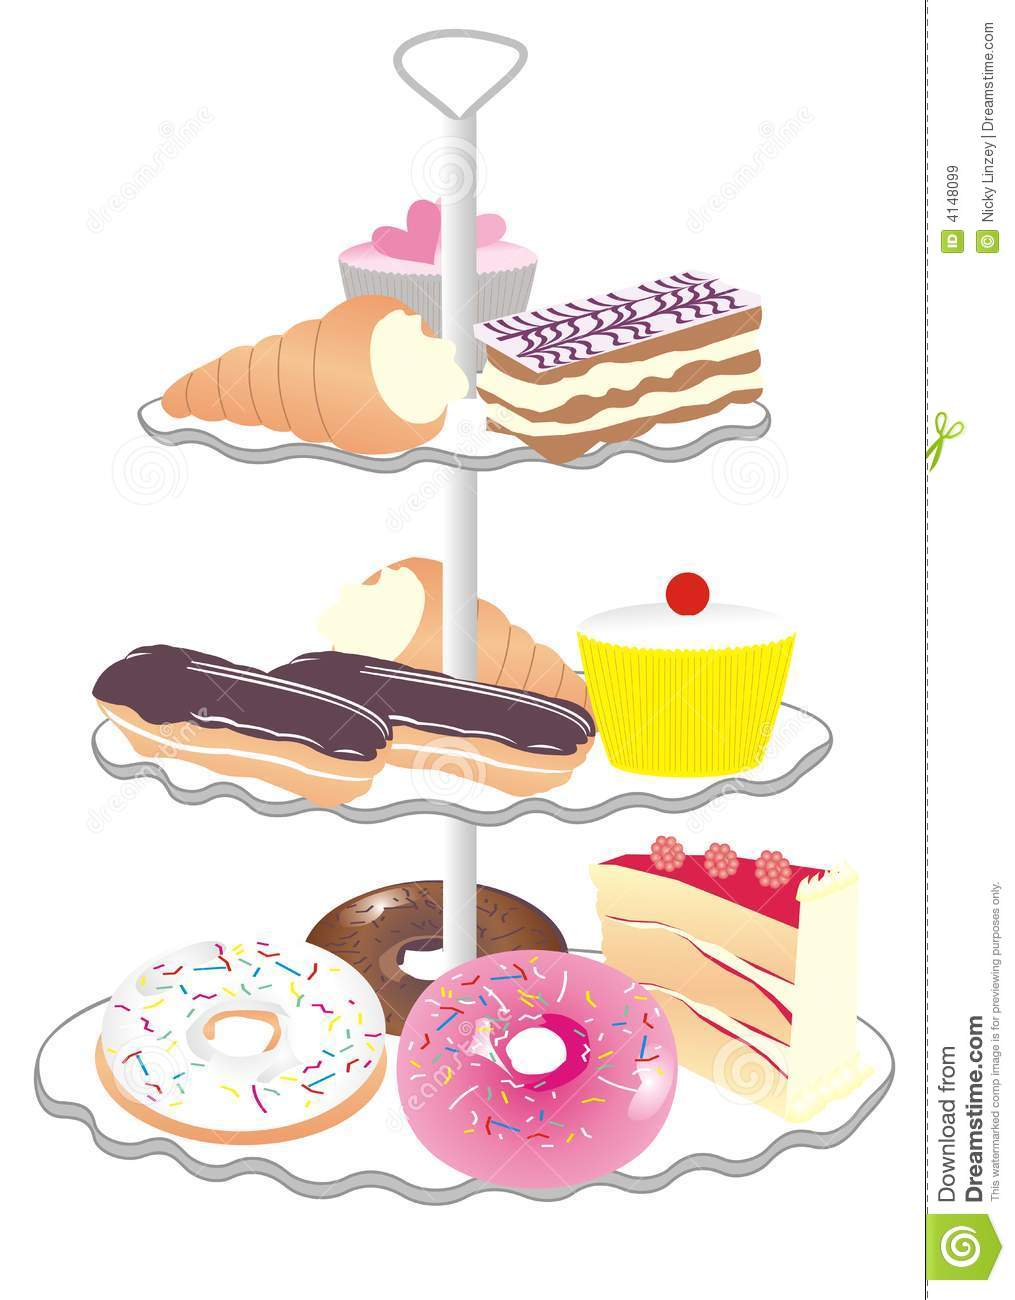 Illustration Of Cream Cakes And Pastries On A Cake Stand